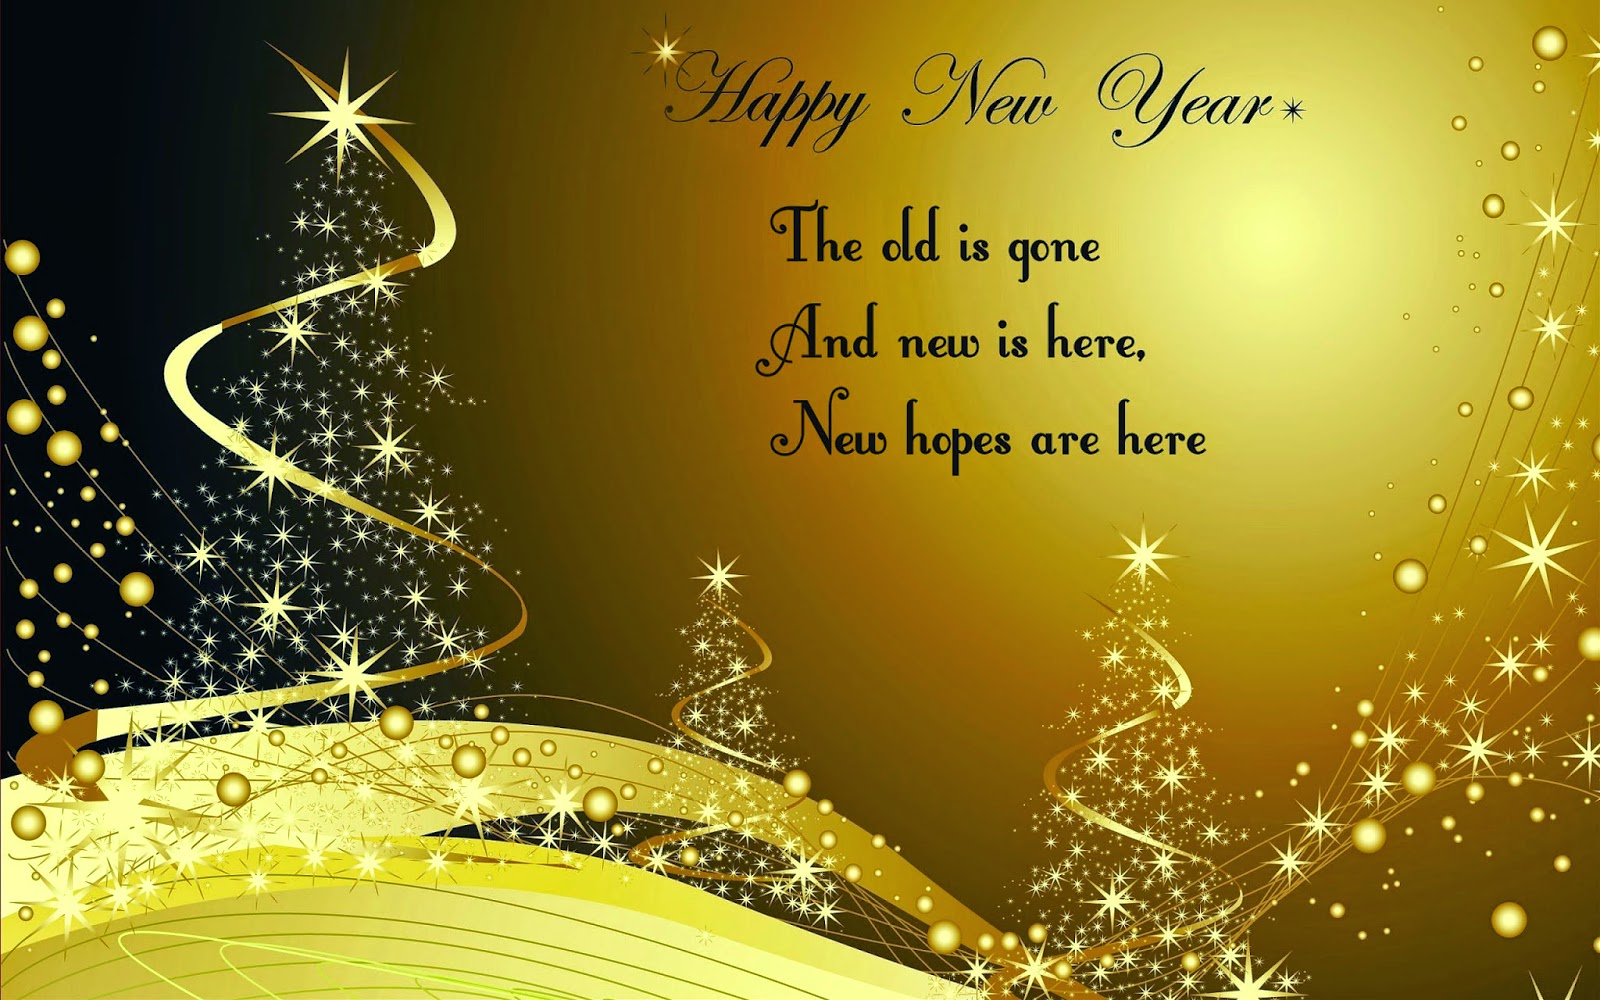 Happy New Year 2020 Wallpapers for PC / Mac / Windows 7.8.10 - Free  Download - Napkforpc.com